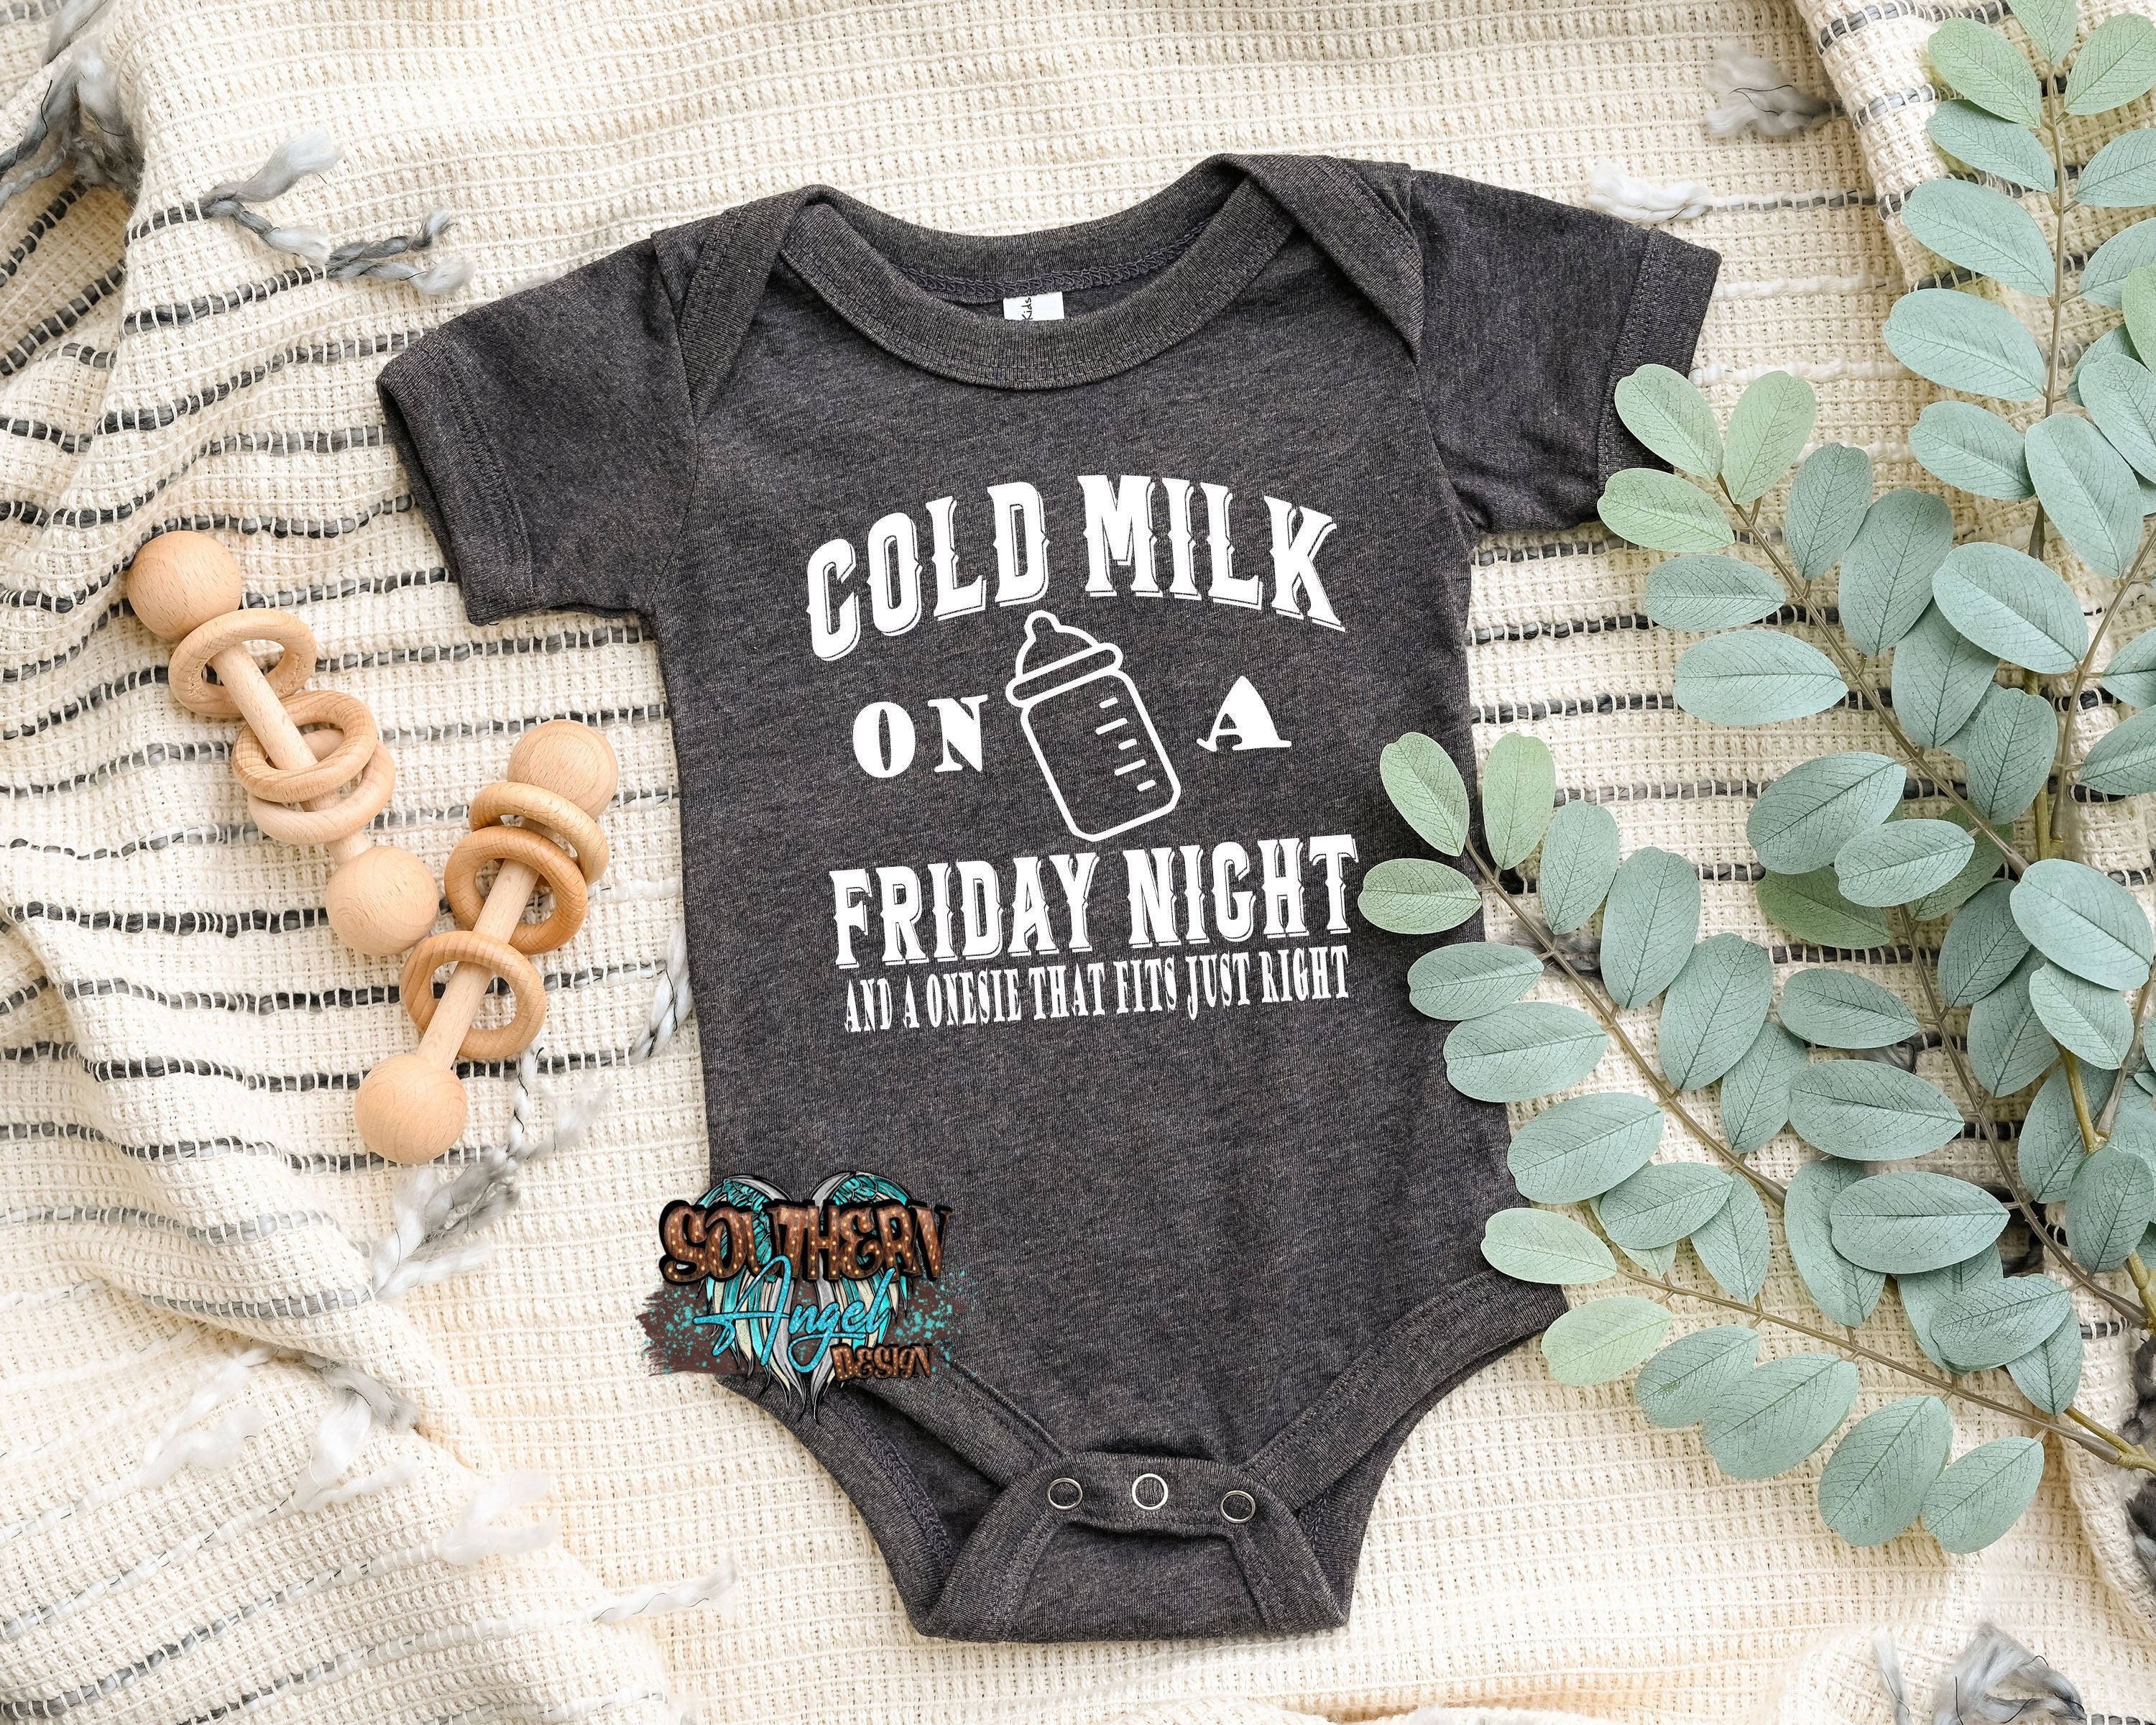 Cold Milk On A Friday Night, Gender neutral outfit, country music shirt, funny baby bodysuit, Cute baby bodysuit, Baby shower gift